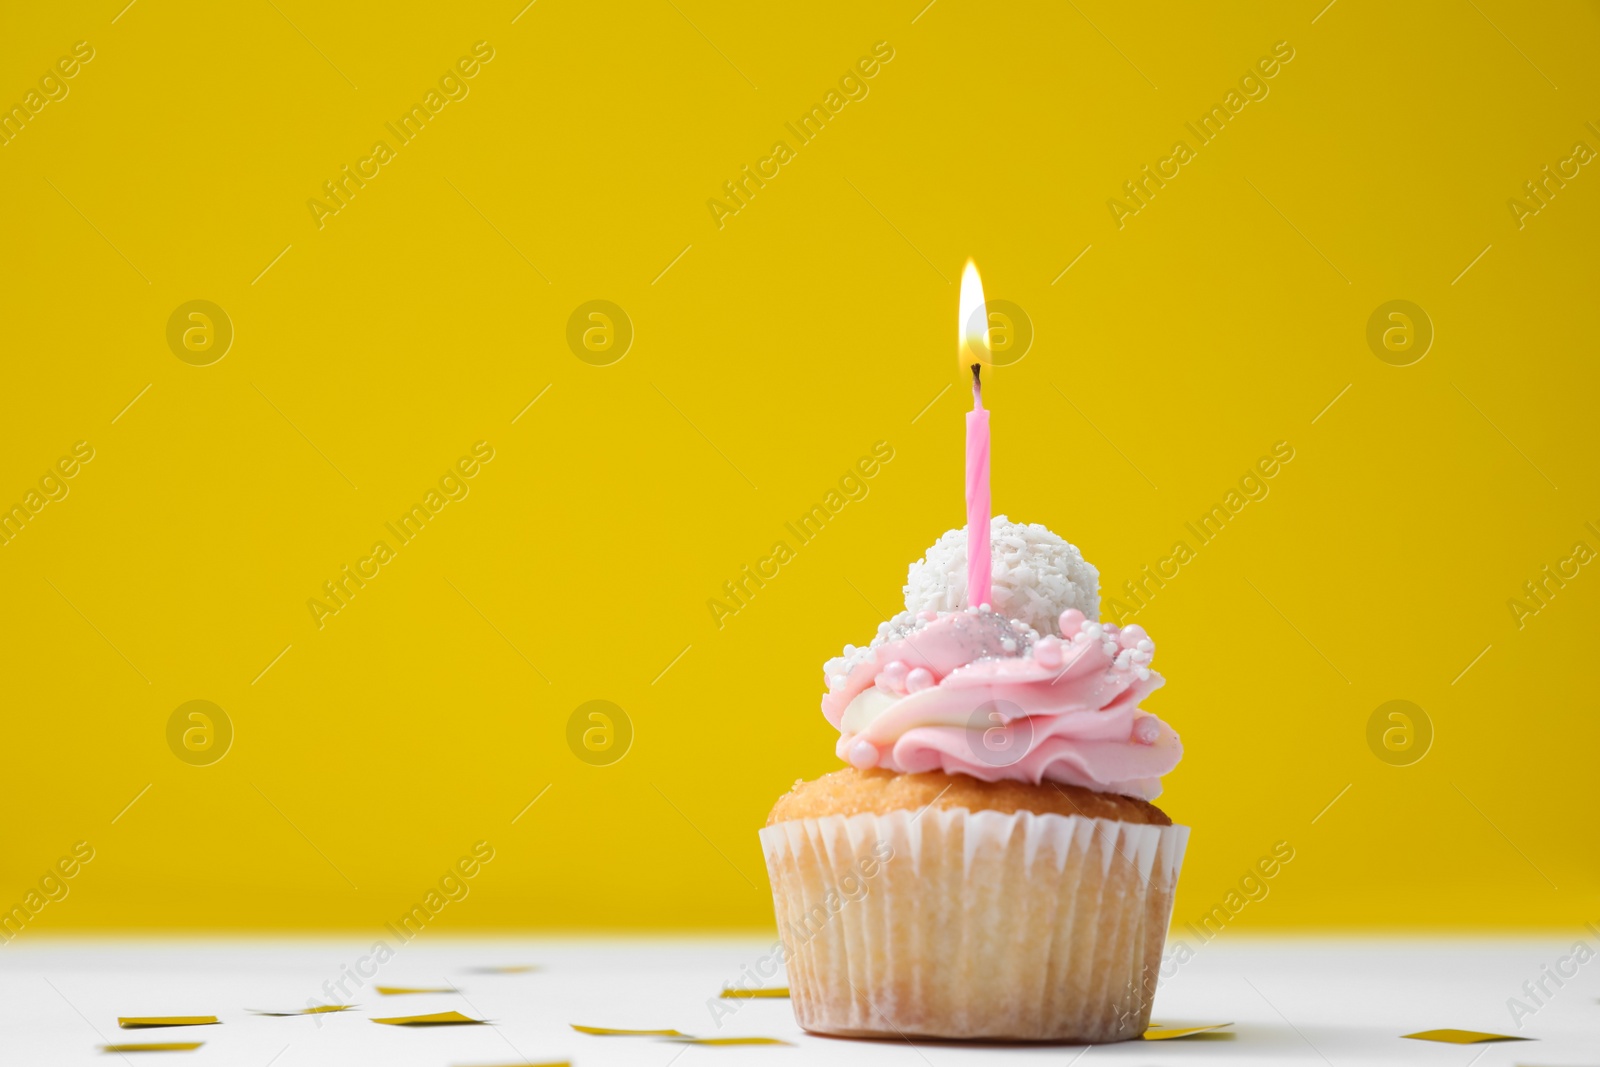 Photo of Delicious birthday cupcake with candle and confetti on white table against yellow background. Space for text